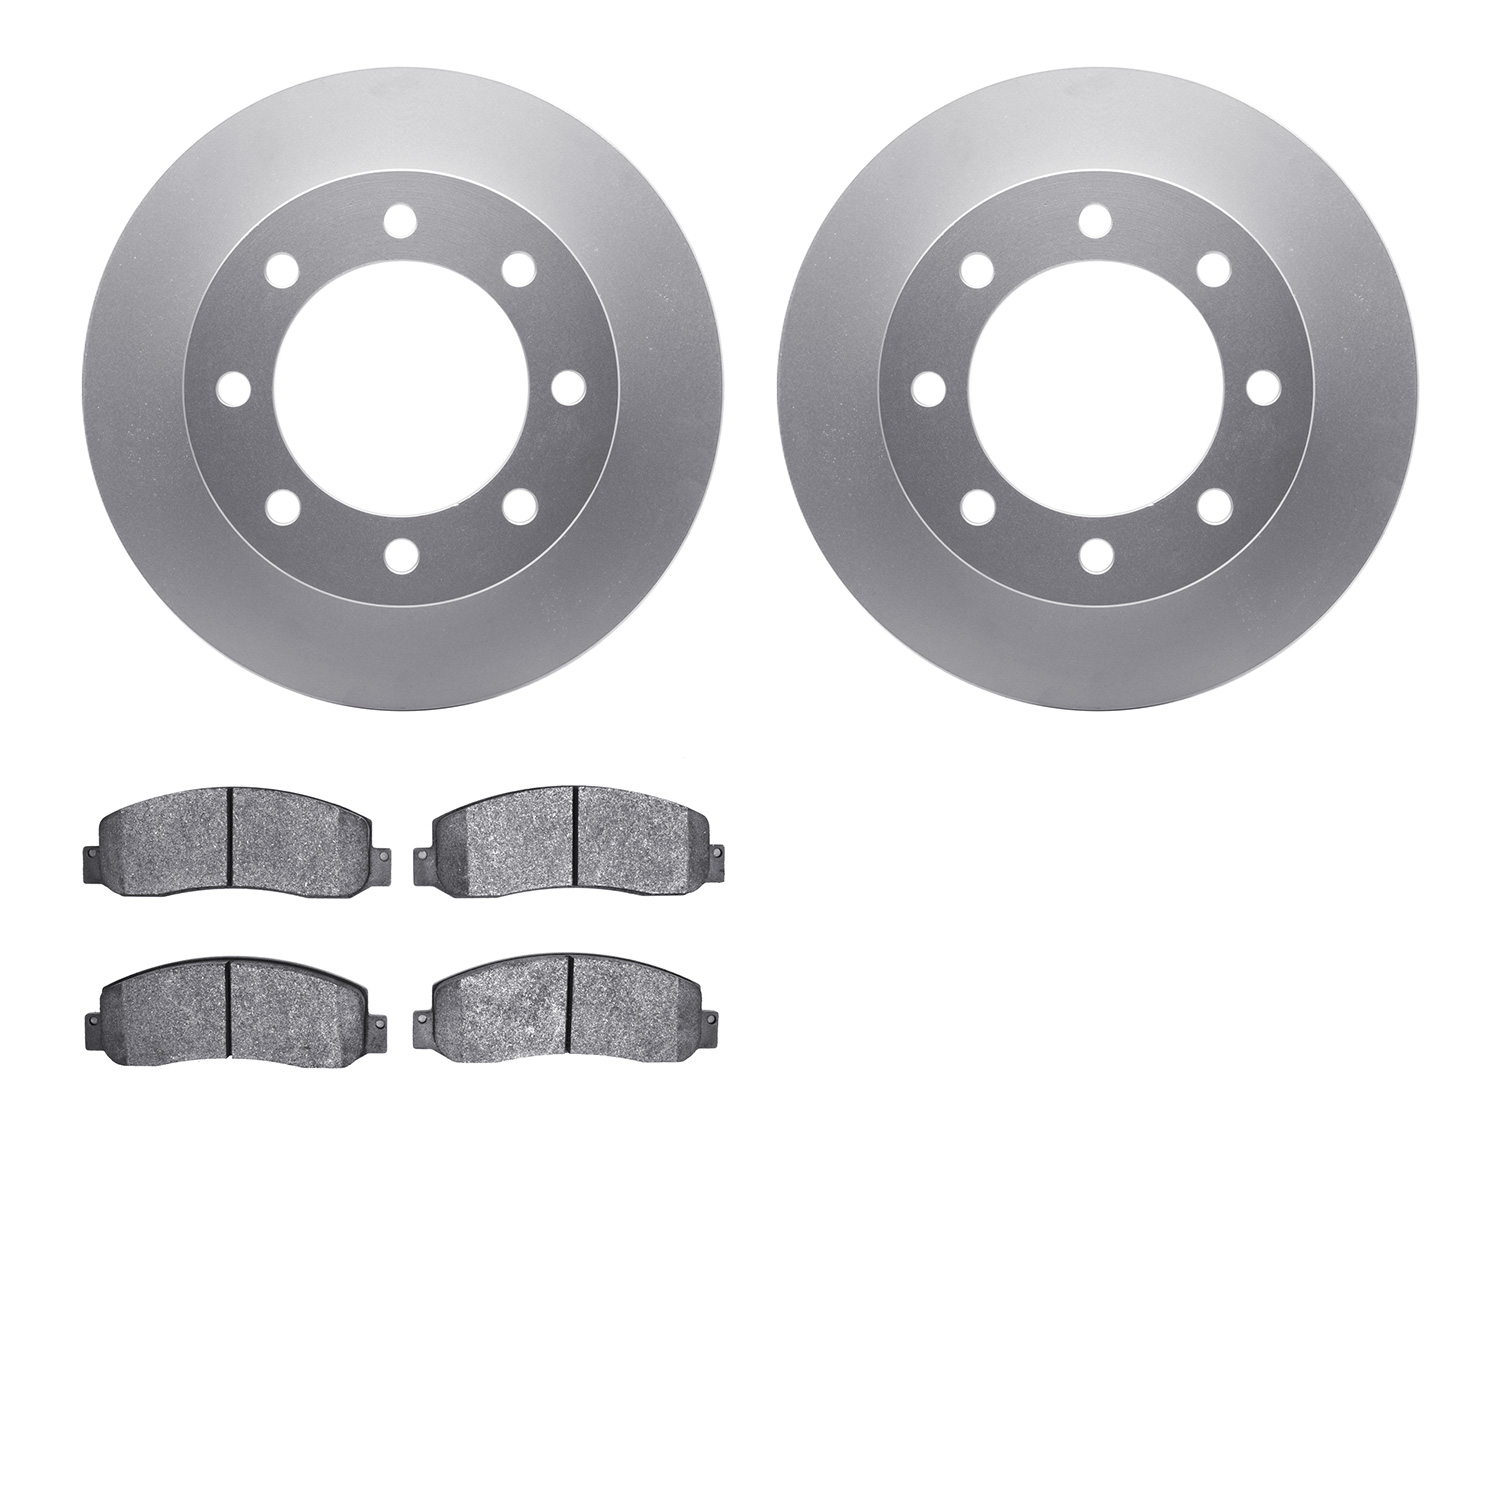 4402-54051 Geospec Brake Rotors with Ultimate-Duty Brake Pads Kit, 2005-2012 Ford/Lincoln/Mercury/Mazda, Position: Front